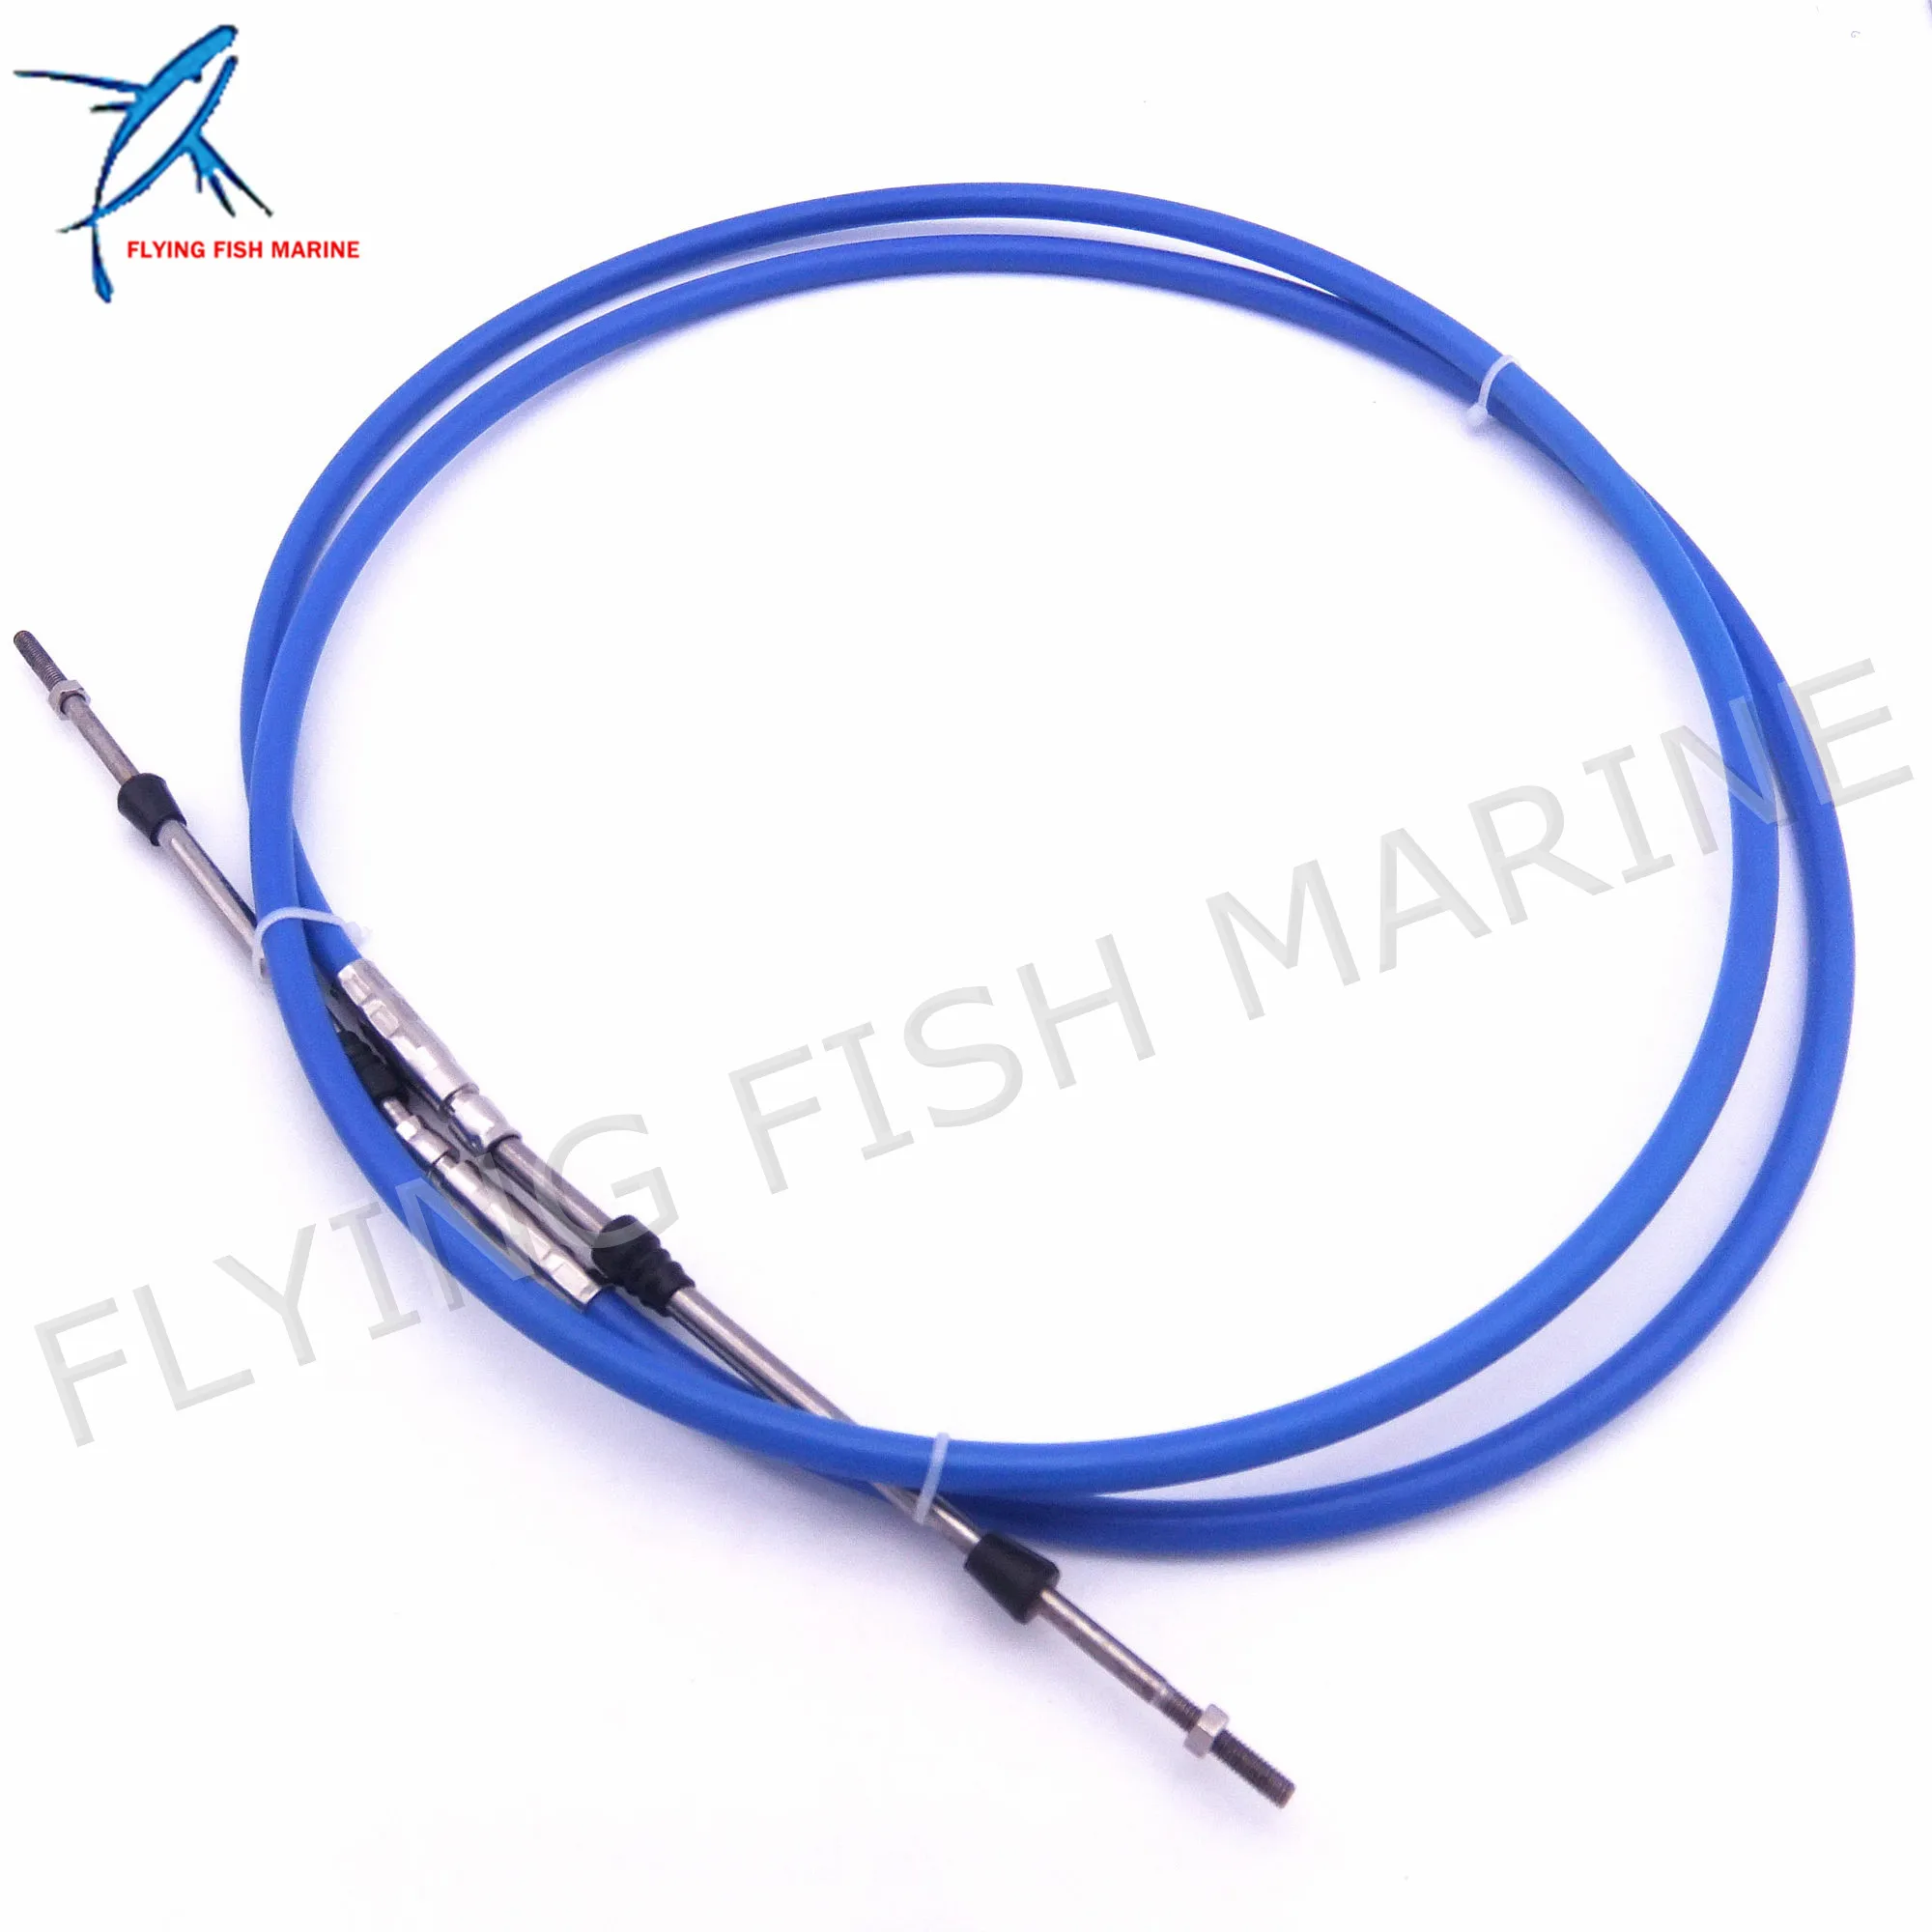 2pcs 10/' Marine Boat Throttle Shift Control Cable for Yamaha Motor Outboard